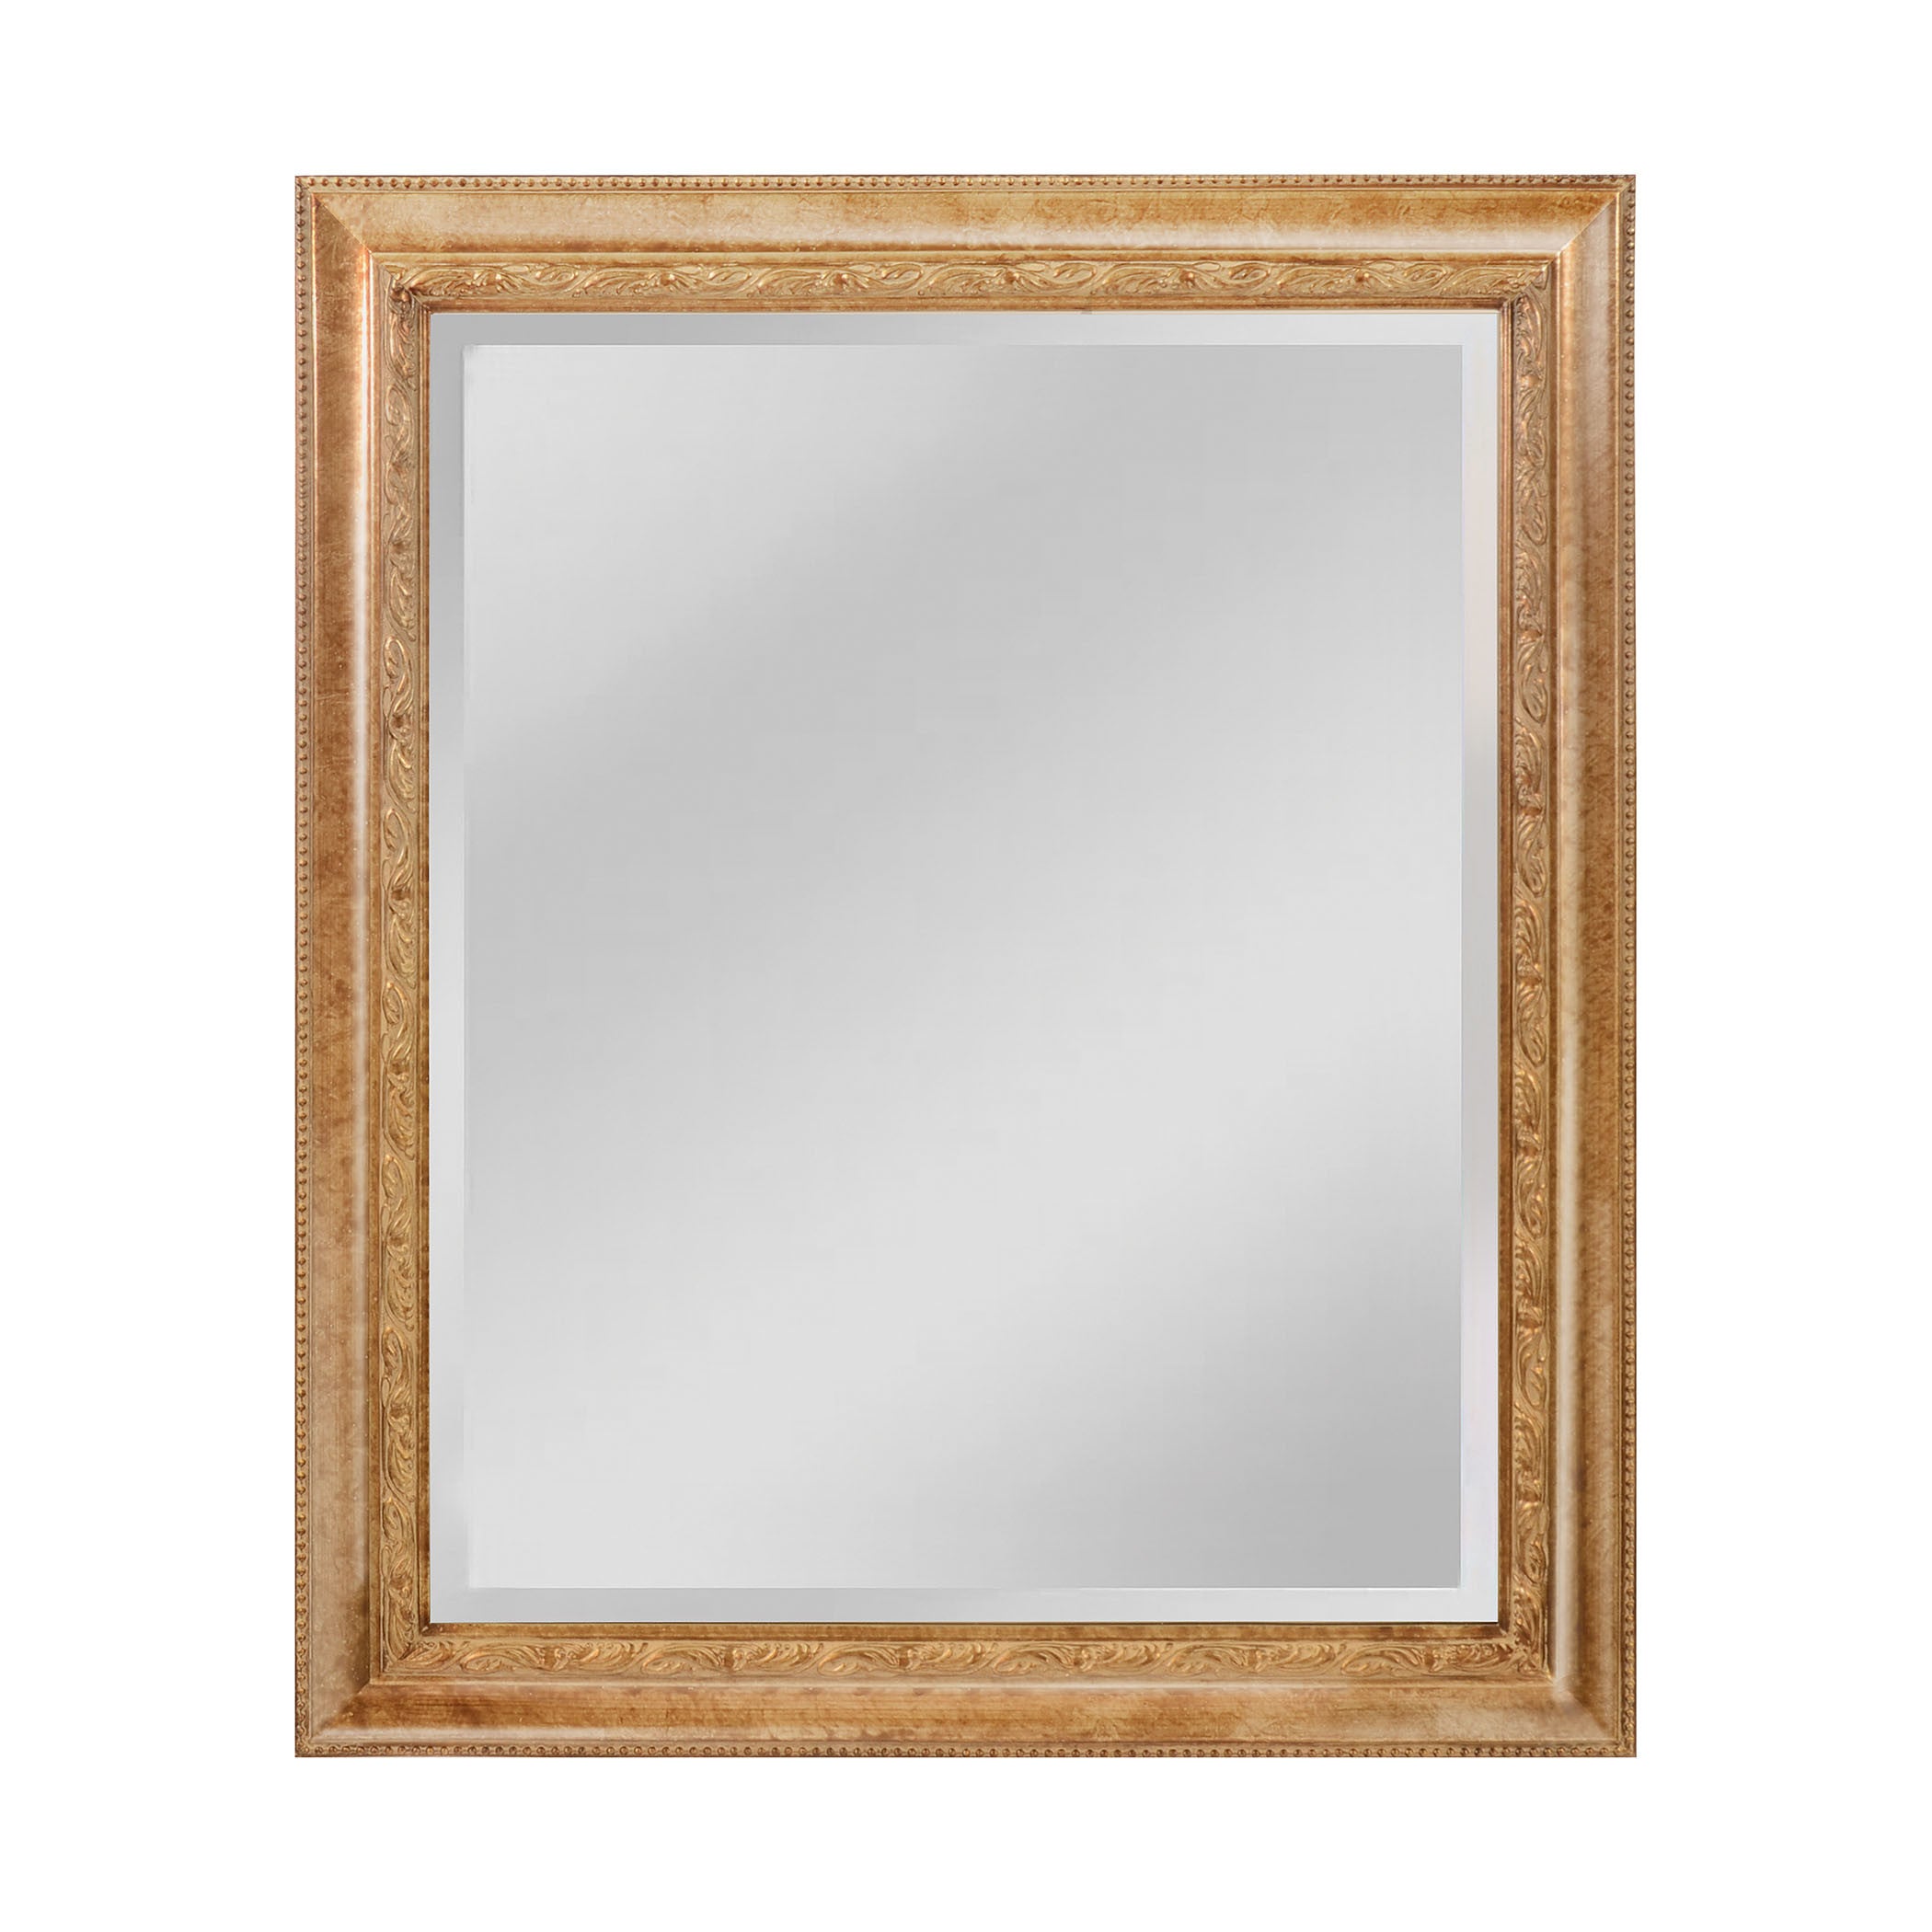 Mirror Masters Mw4303a-0026 Landers Collection Venetian Gold Finish Wall Mirror